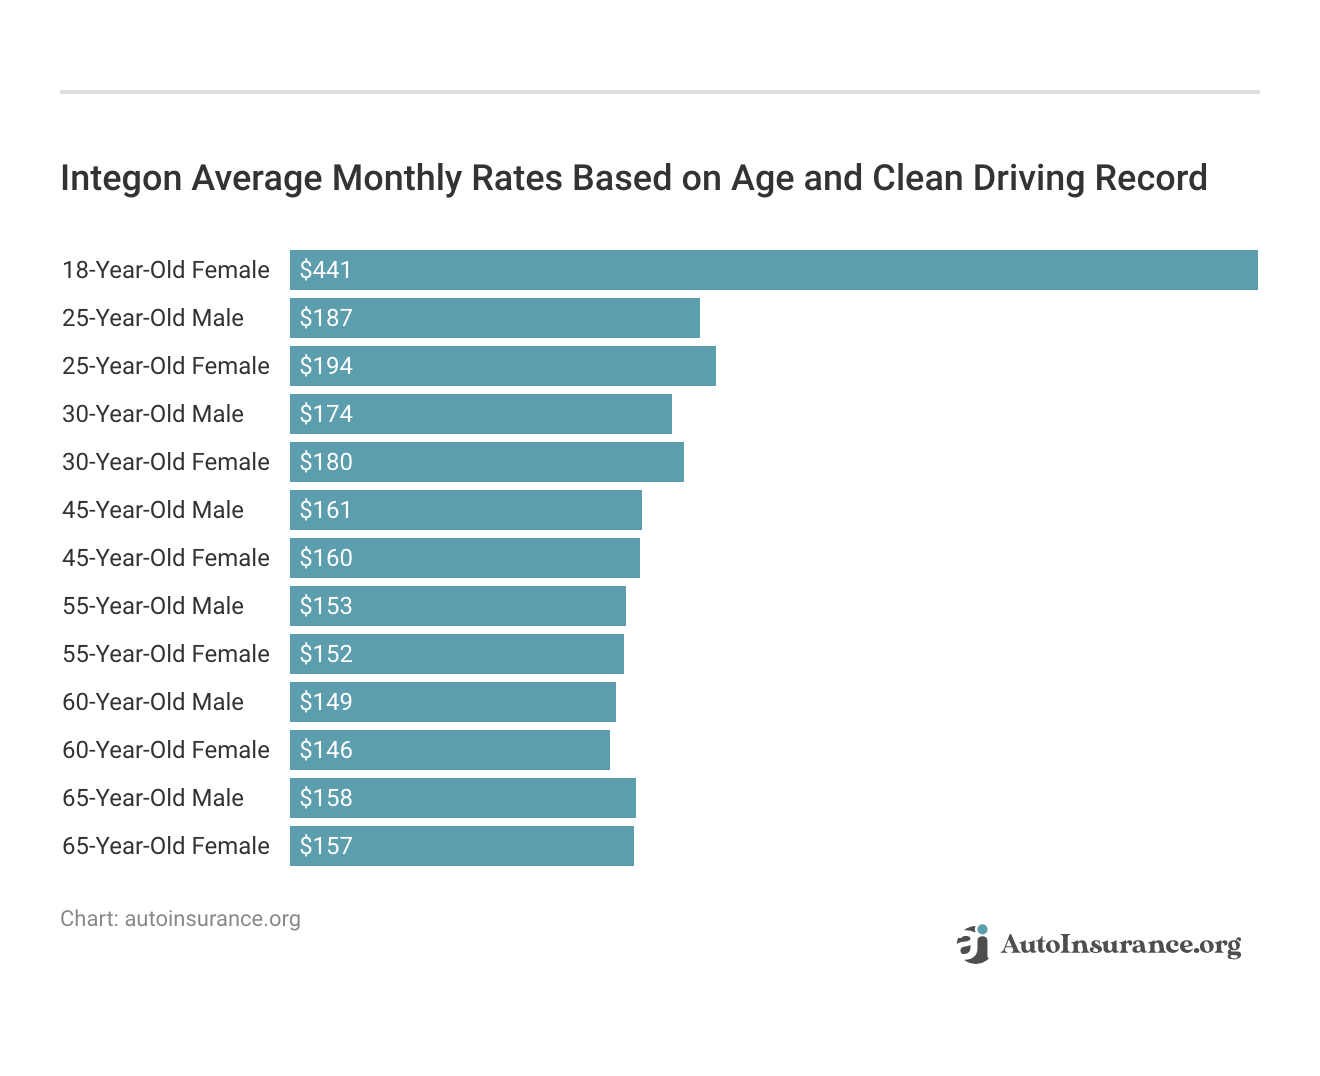 <h3>Integon Average Monthly Rates Based on Age and Clean Driving Record</h3>